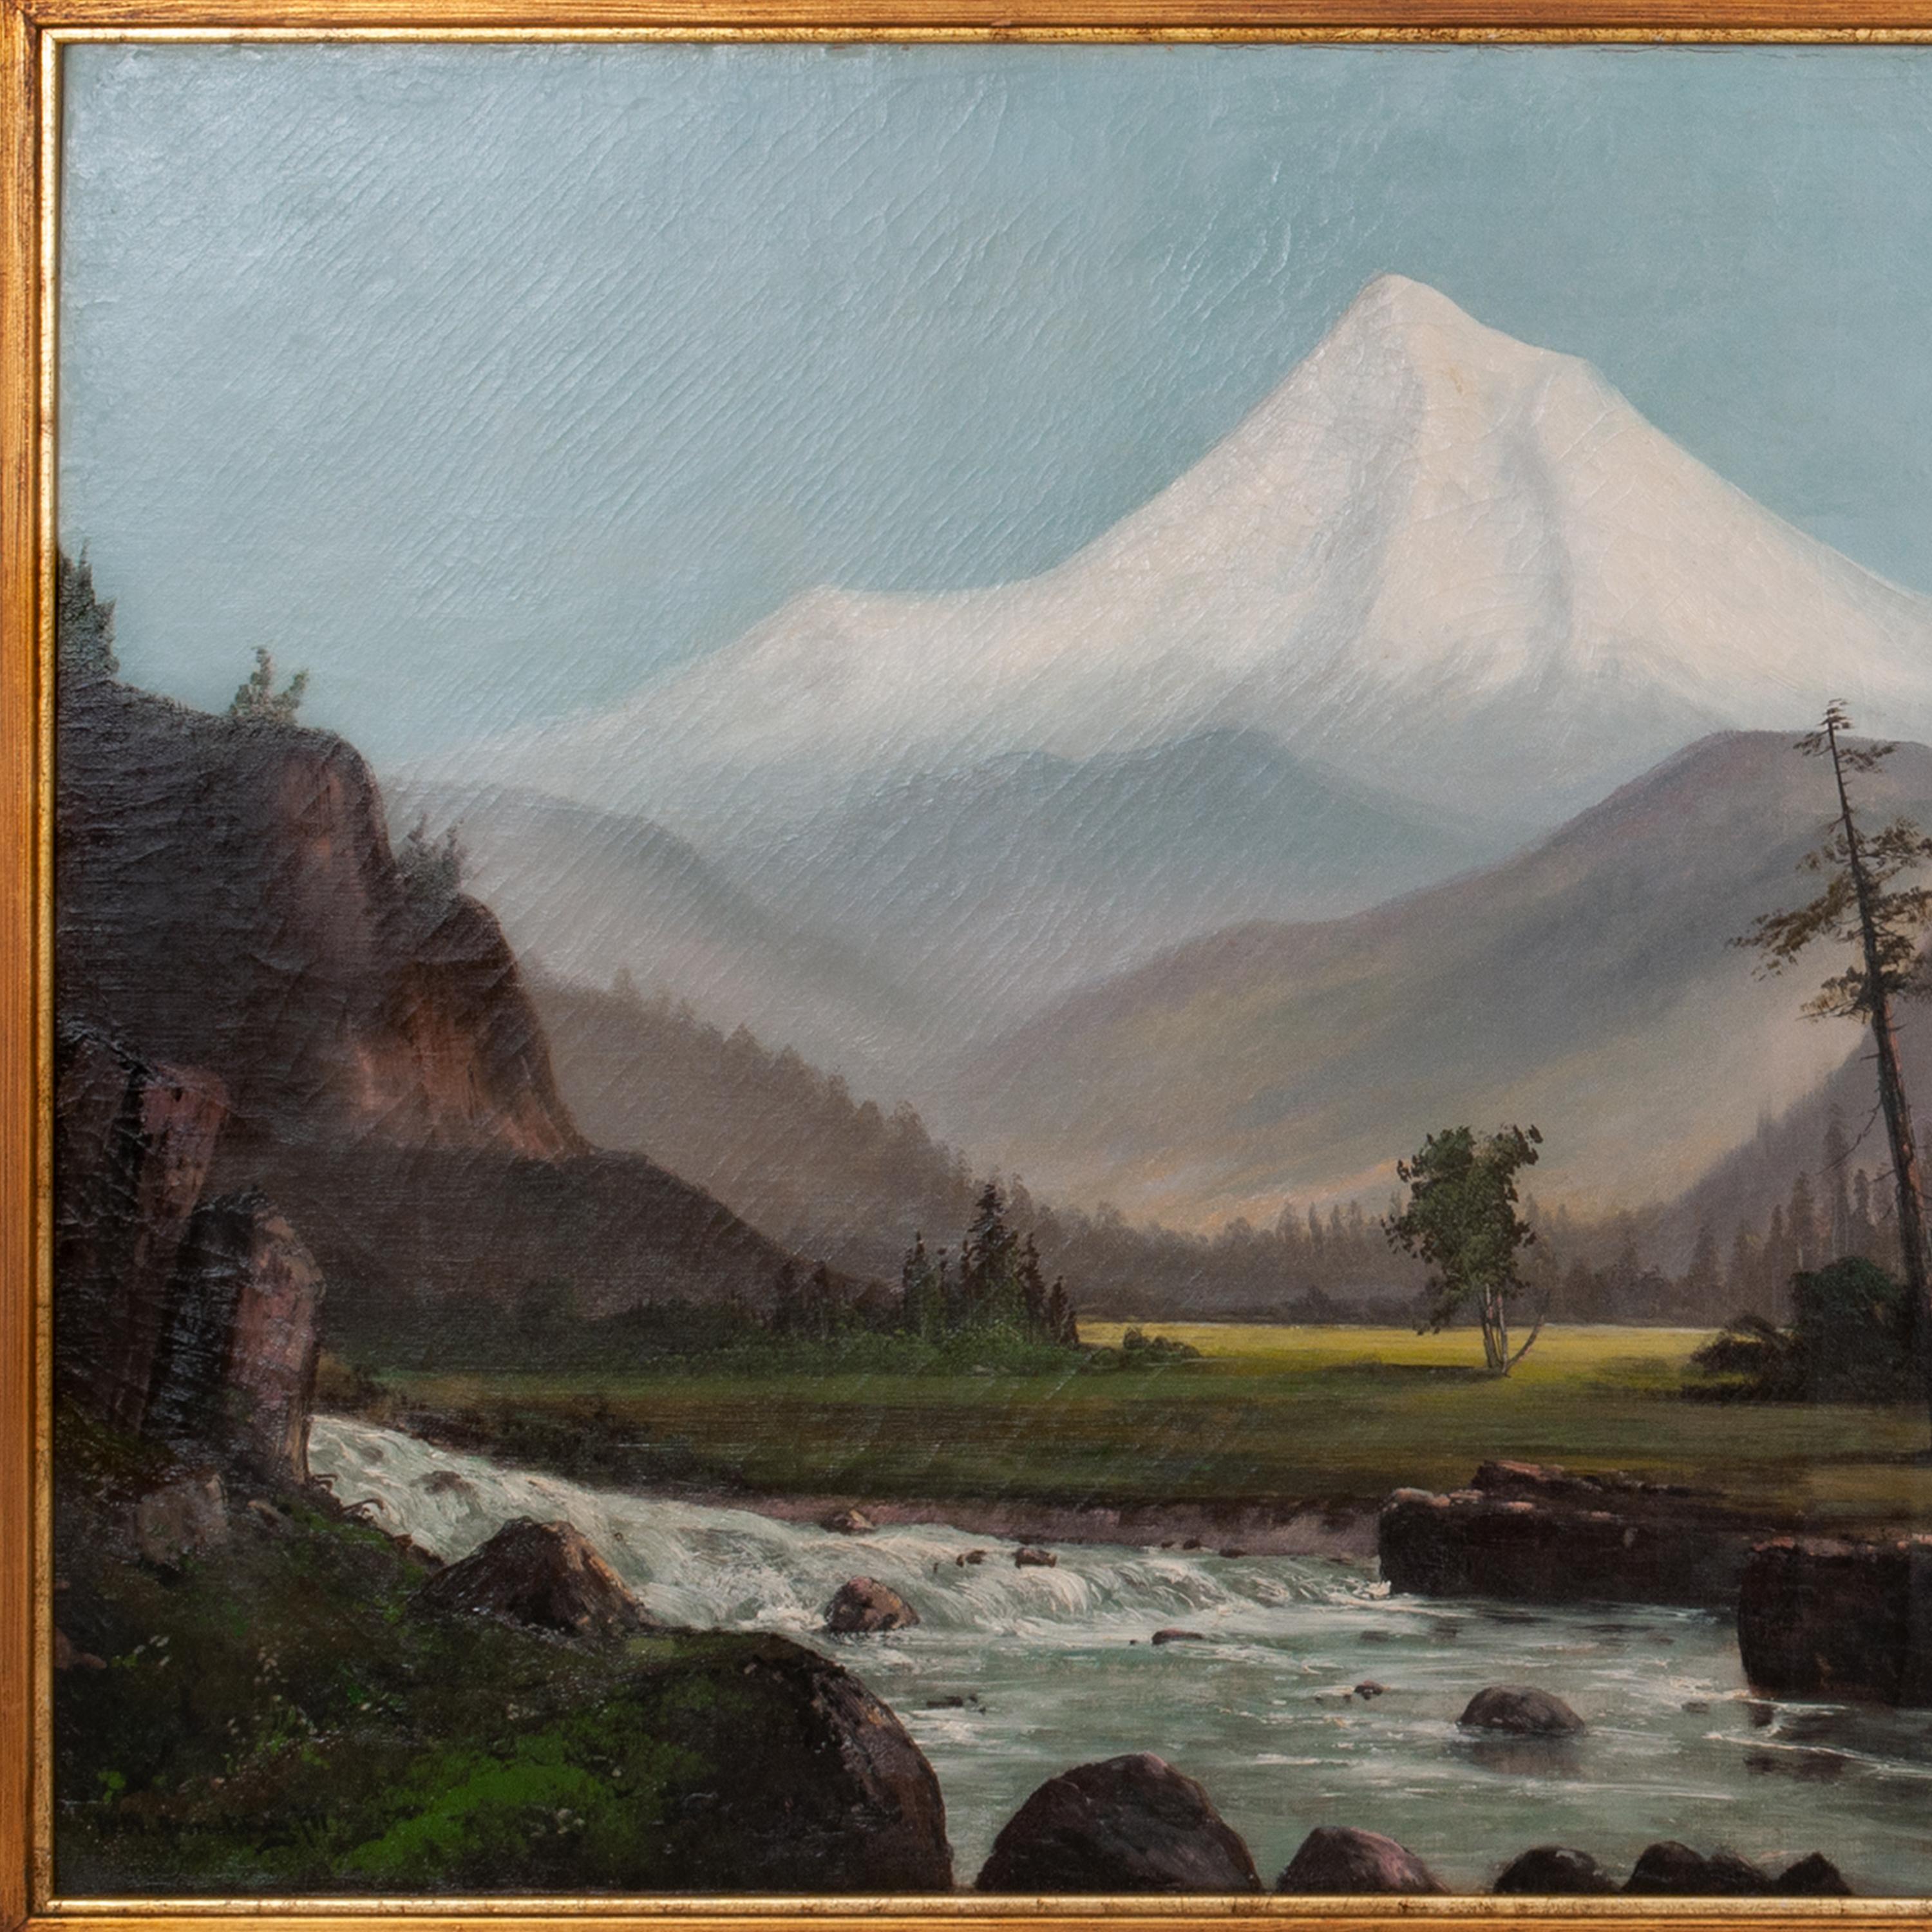 A large oil on Canvas painting by the California artist William Weaver Armstrong (1862-1906), Mount Hood Oregon landscape, circa 1885.
This large landscape depicts the majestic Mount Hood and the wooded landscape below with the White River to the